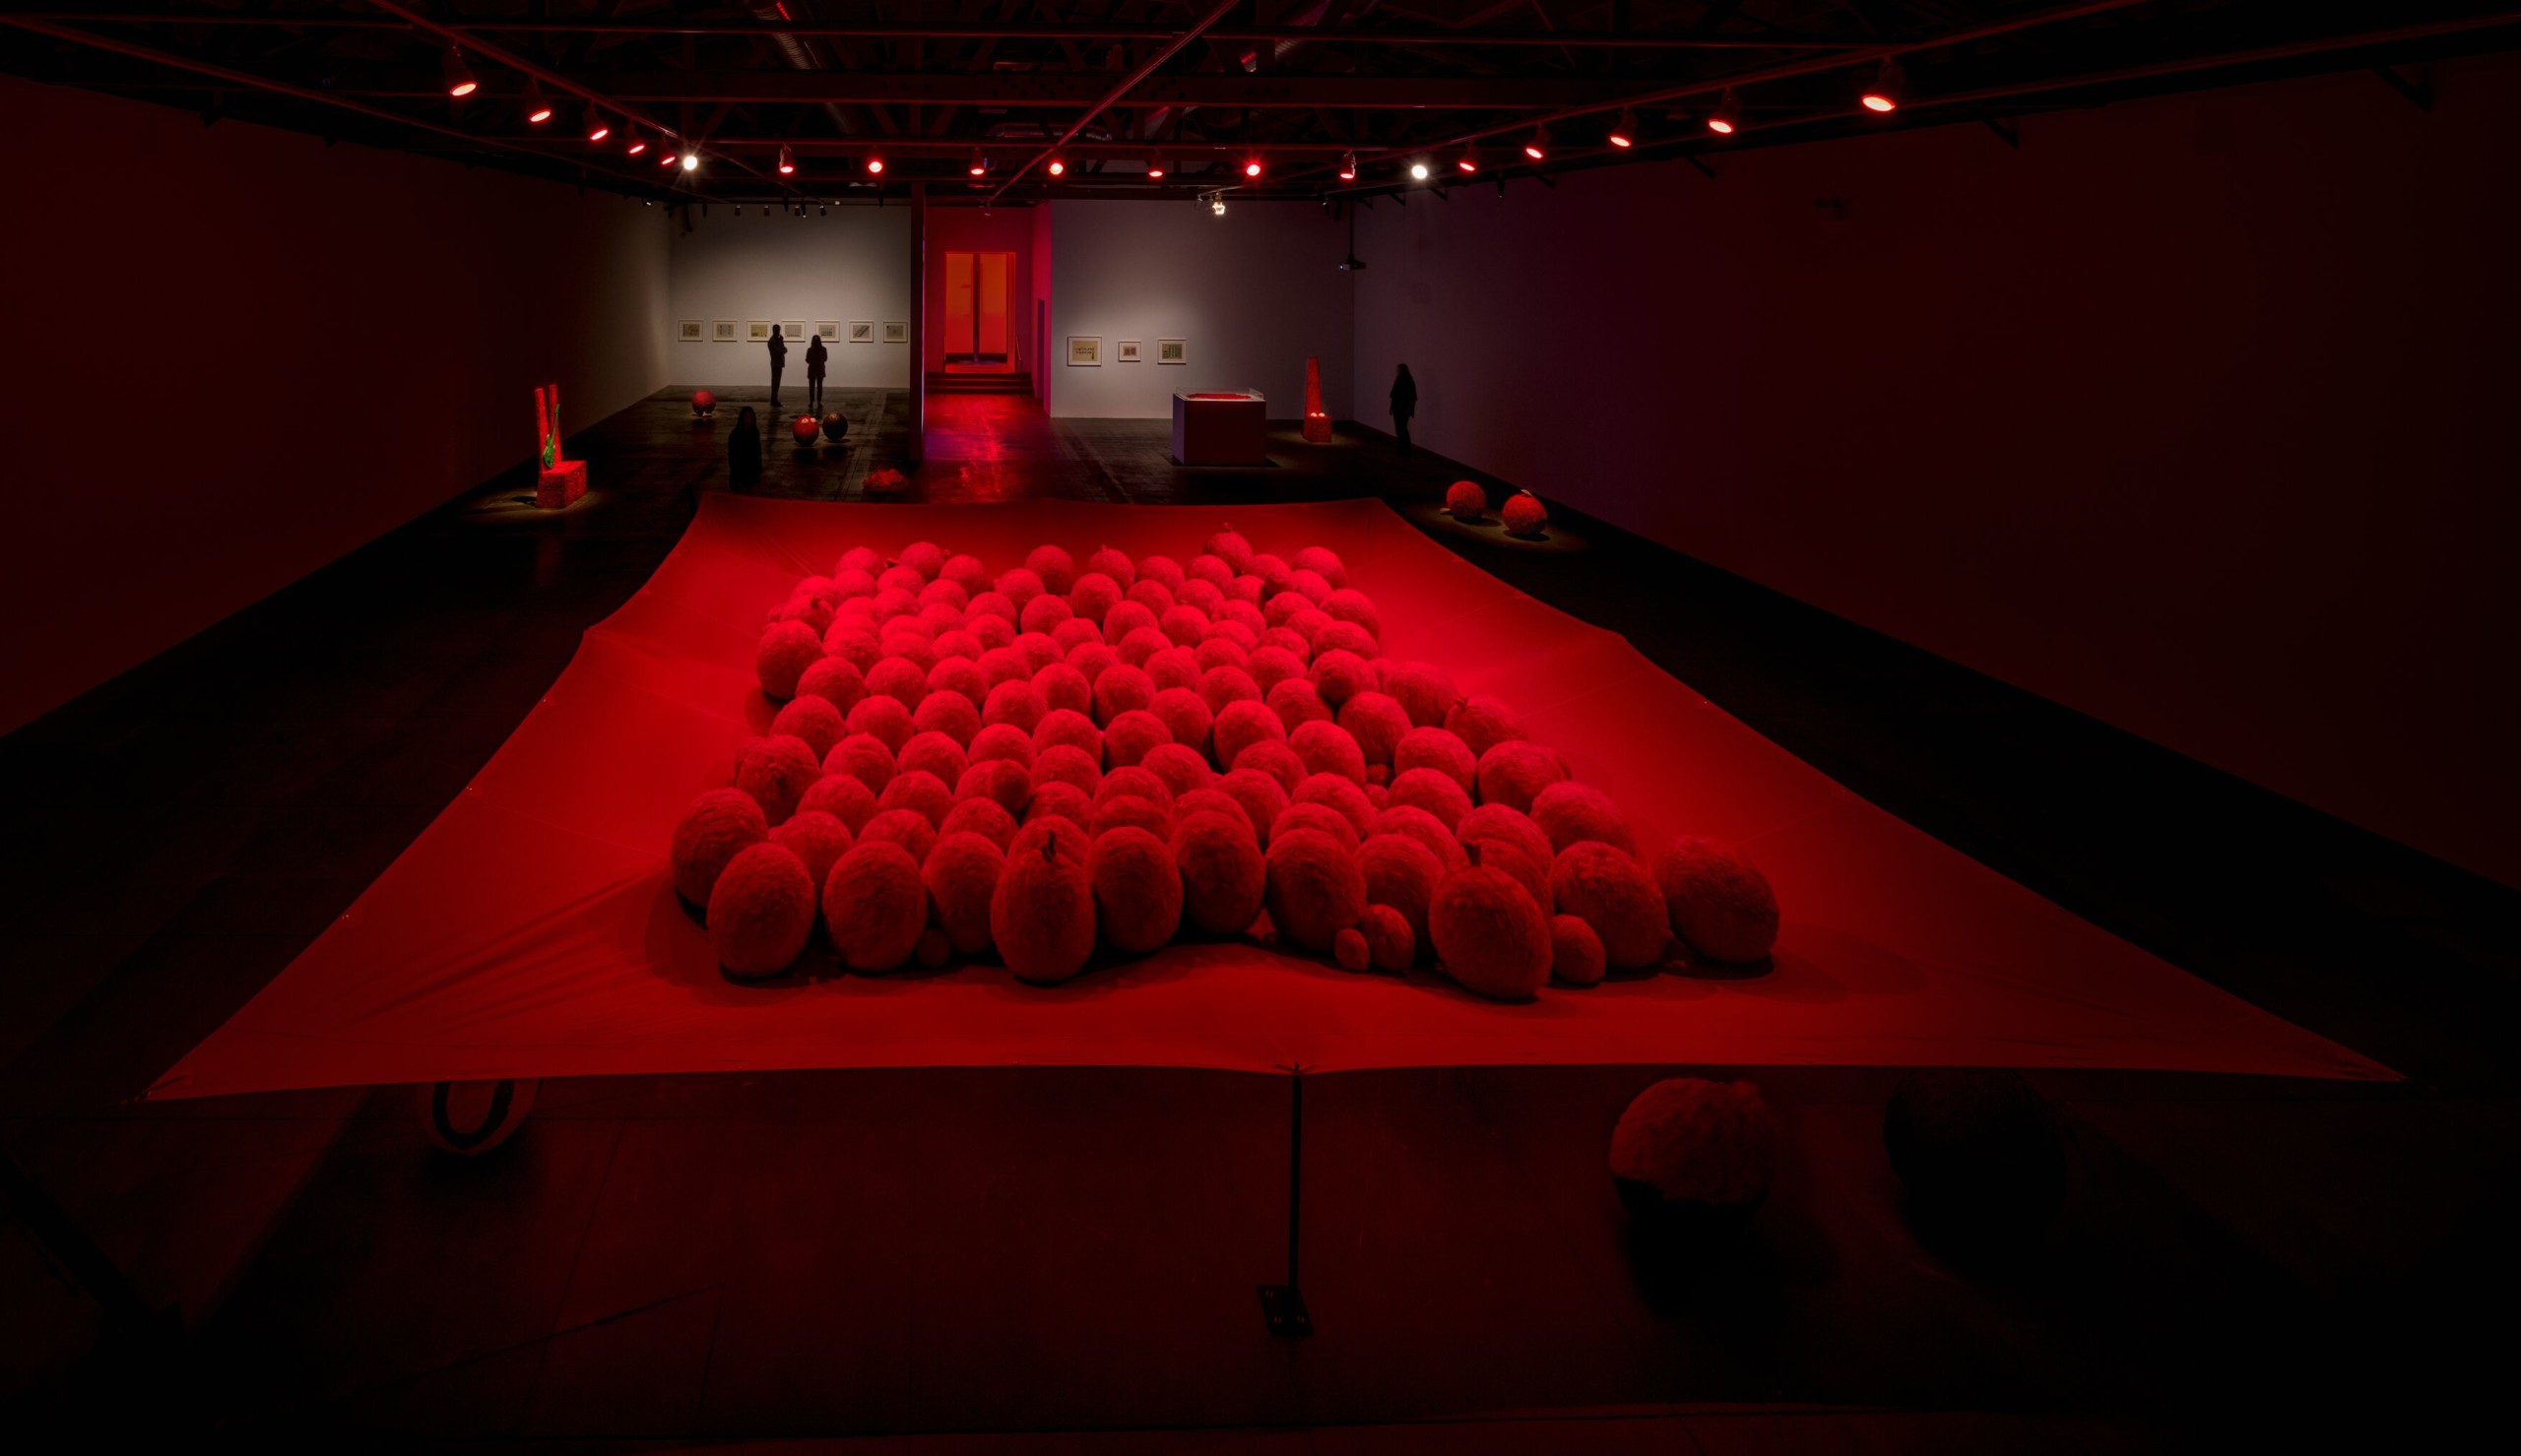 Gallery installation with red lighting on large-scale balls on fabric